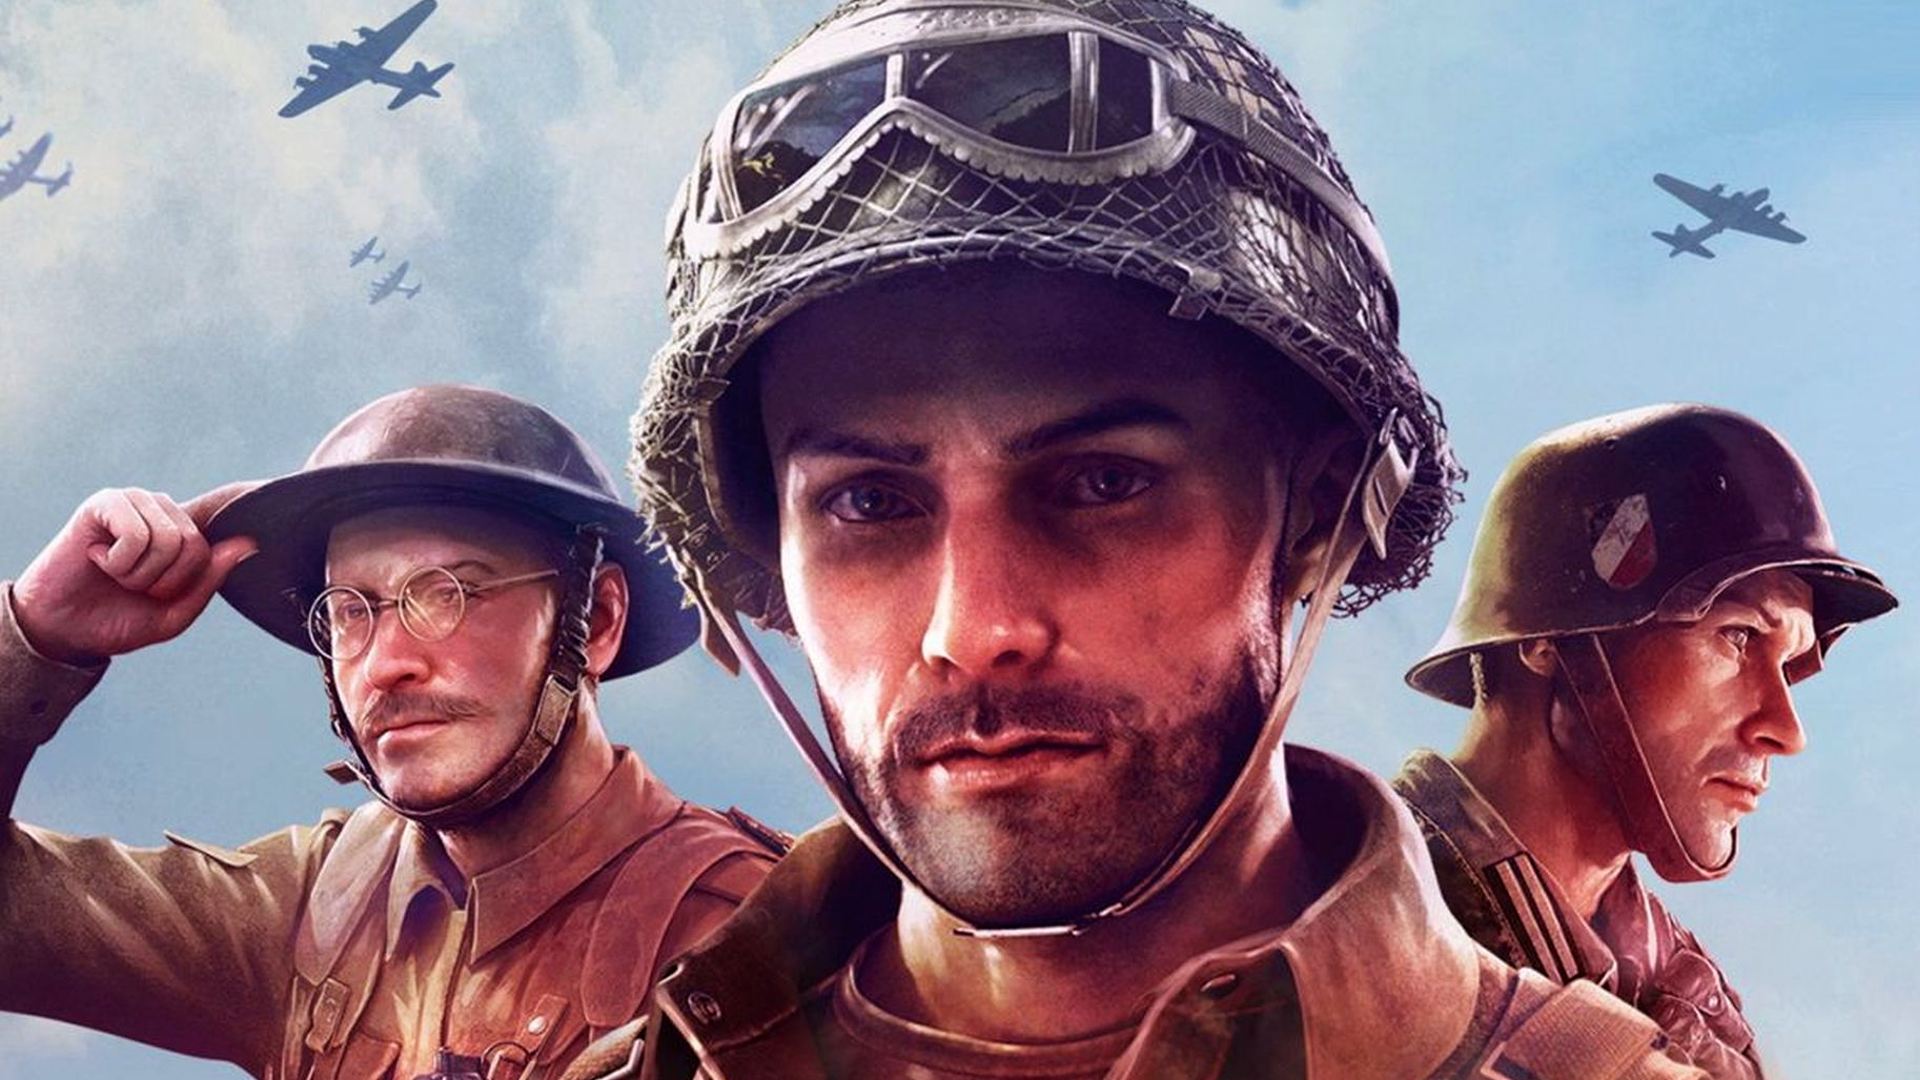 Company of Heroes 3 studio goes indie following Sega restructuring